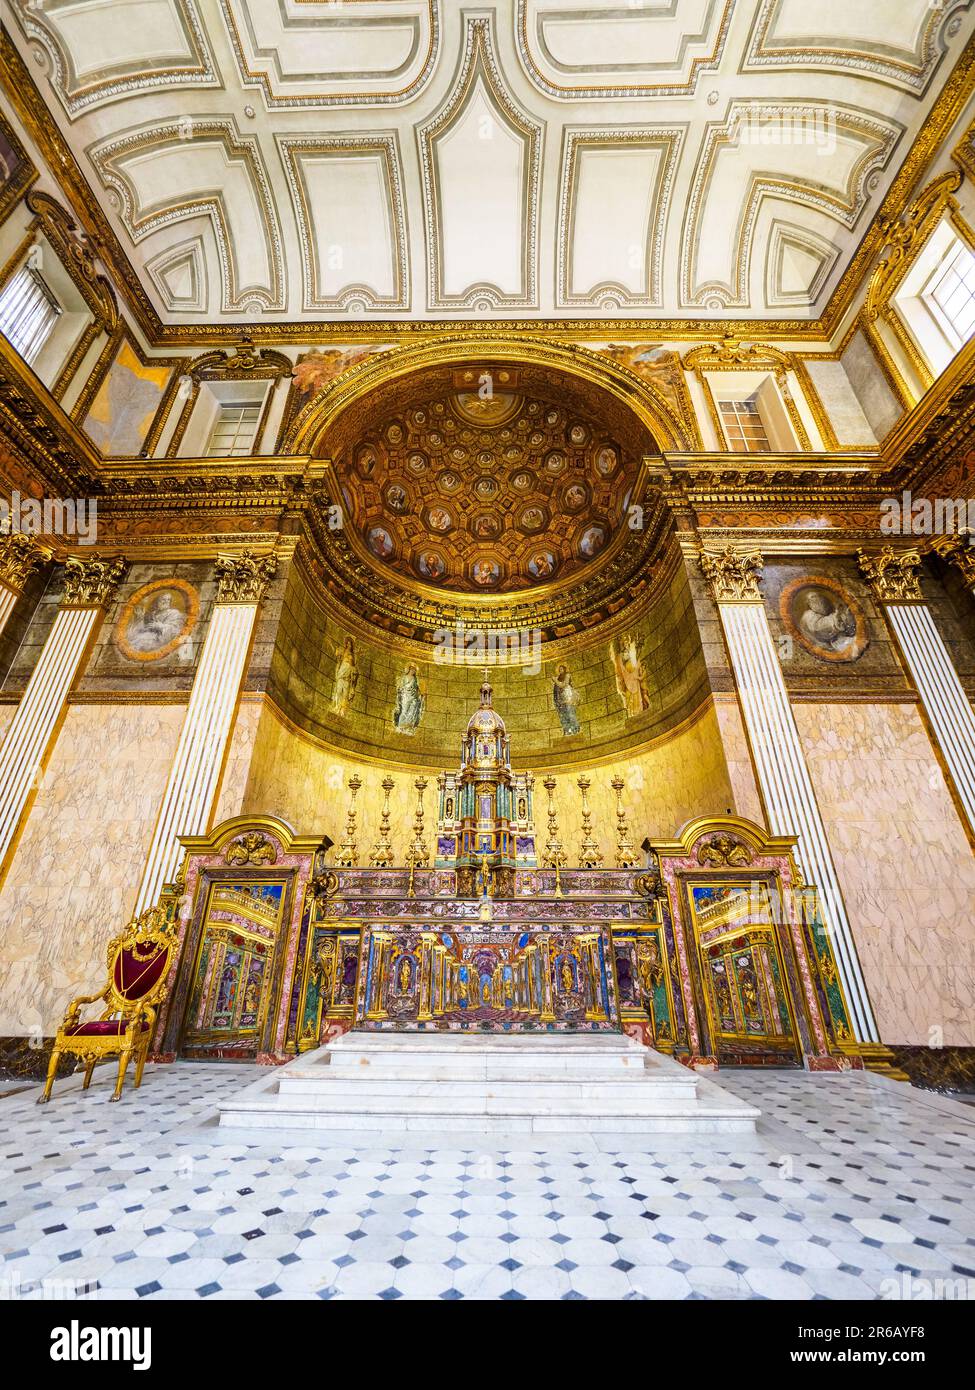 Empire and Neo-Byzantine style Apse in the Royal Chapel, dedicated to Our Lady of Assumption - Royal Palace of Naples that In 1734 became the royal residence of the Bourbons - Naples, Italy Stock Photo